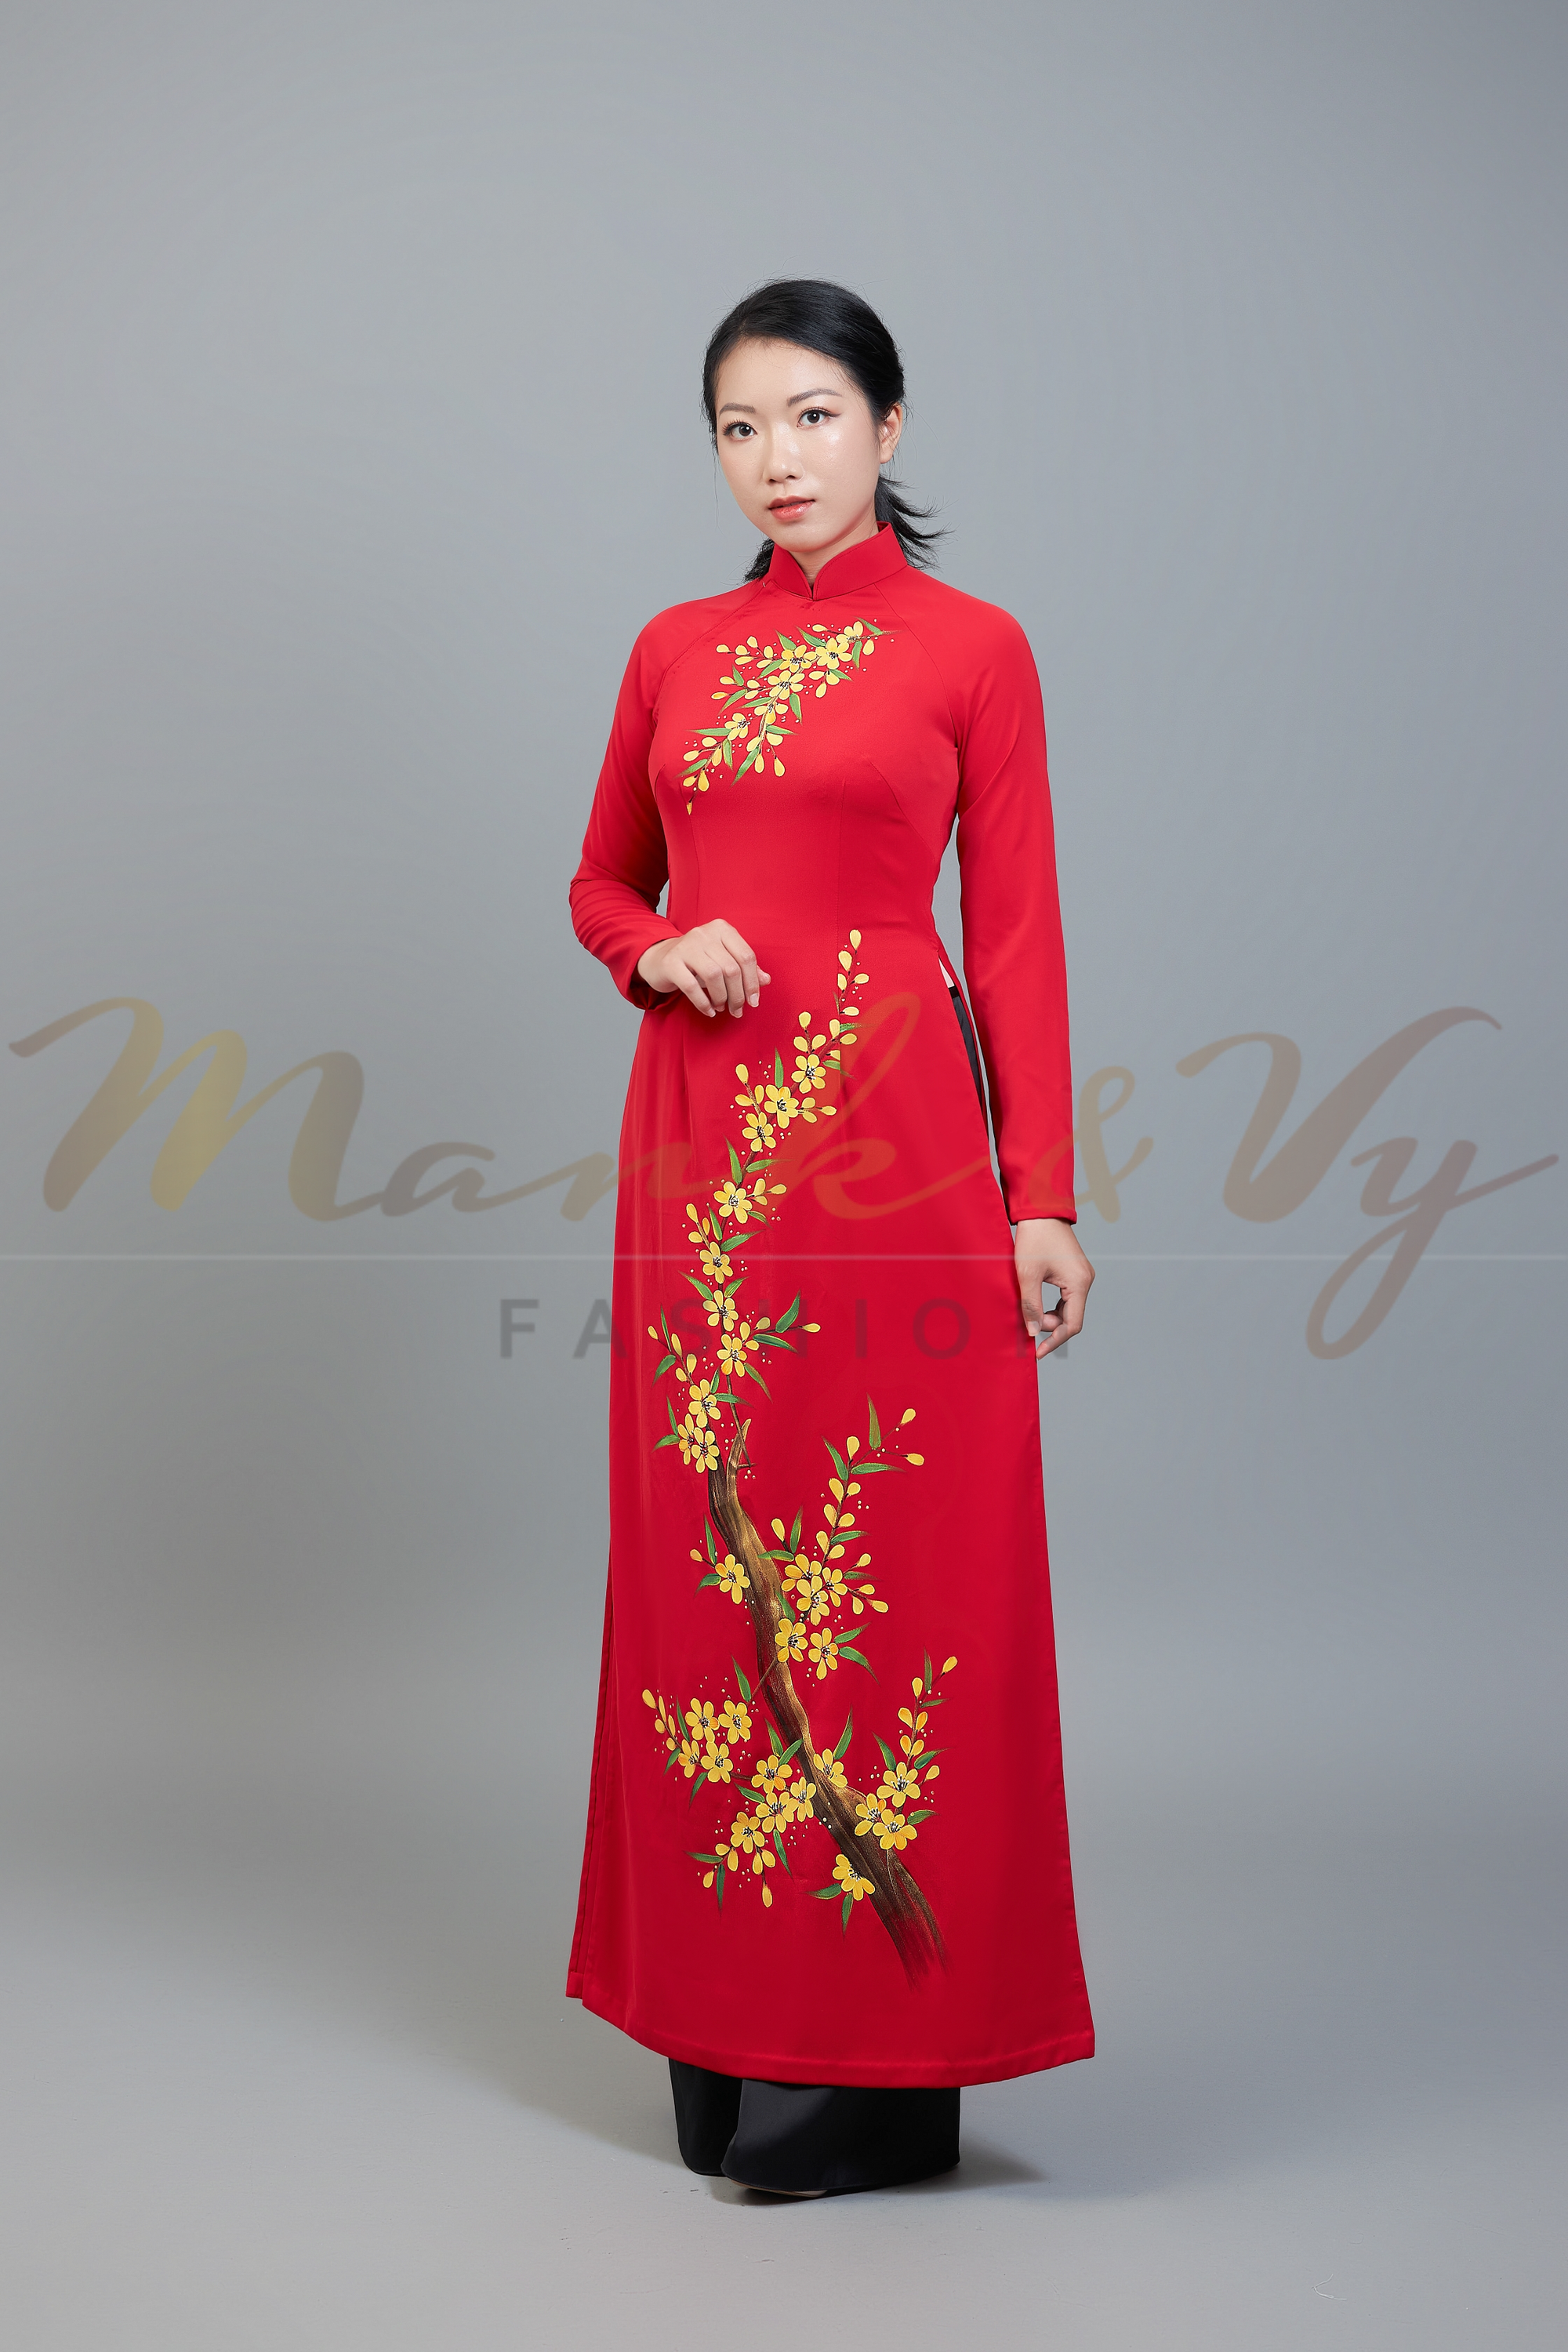 Custom made ao dai. Unique, hand-painted, floral motif on striking, red fabric.